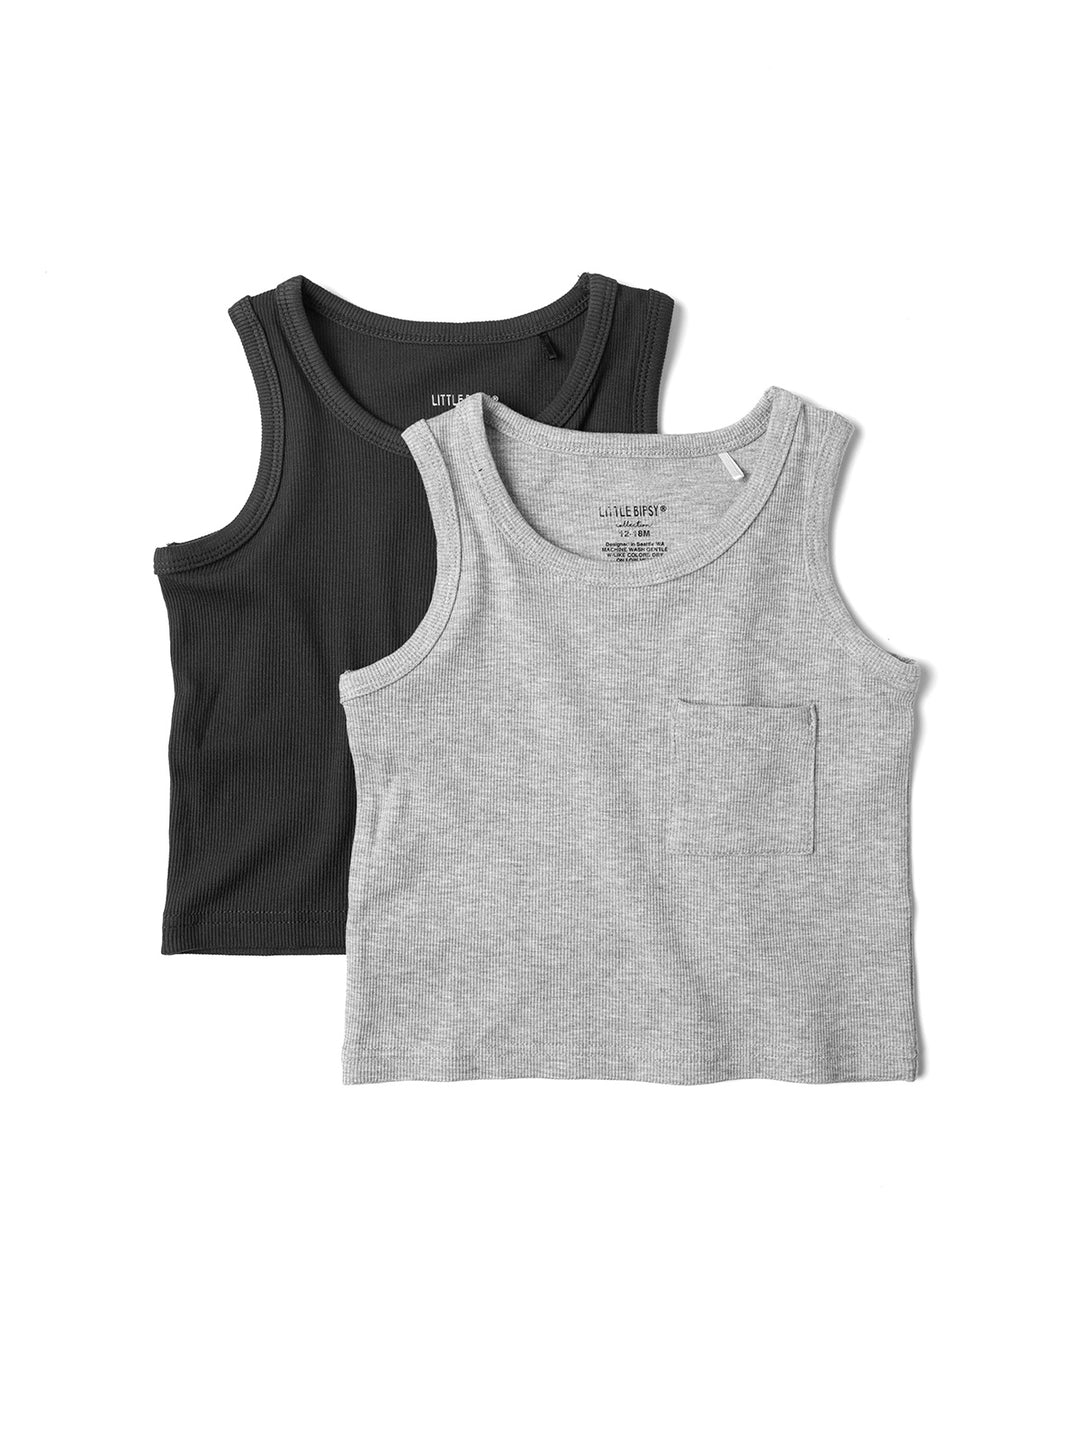 Little Bipsy Ribbed Tank in Charcoal